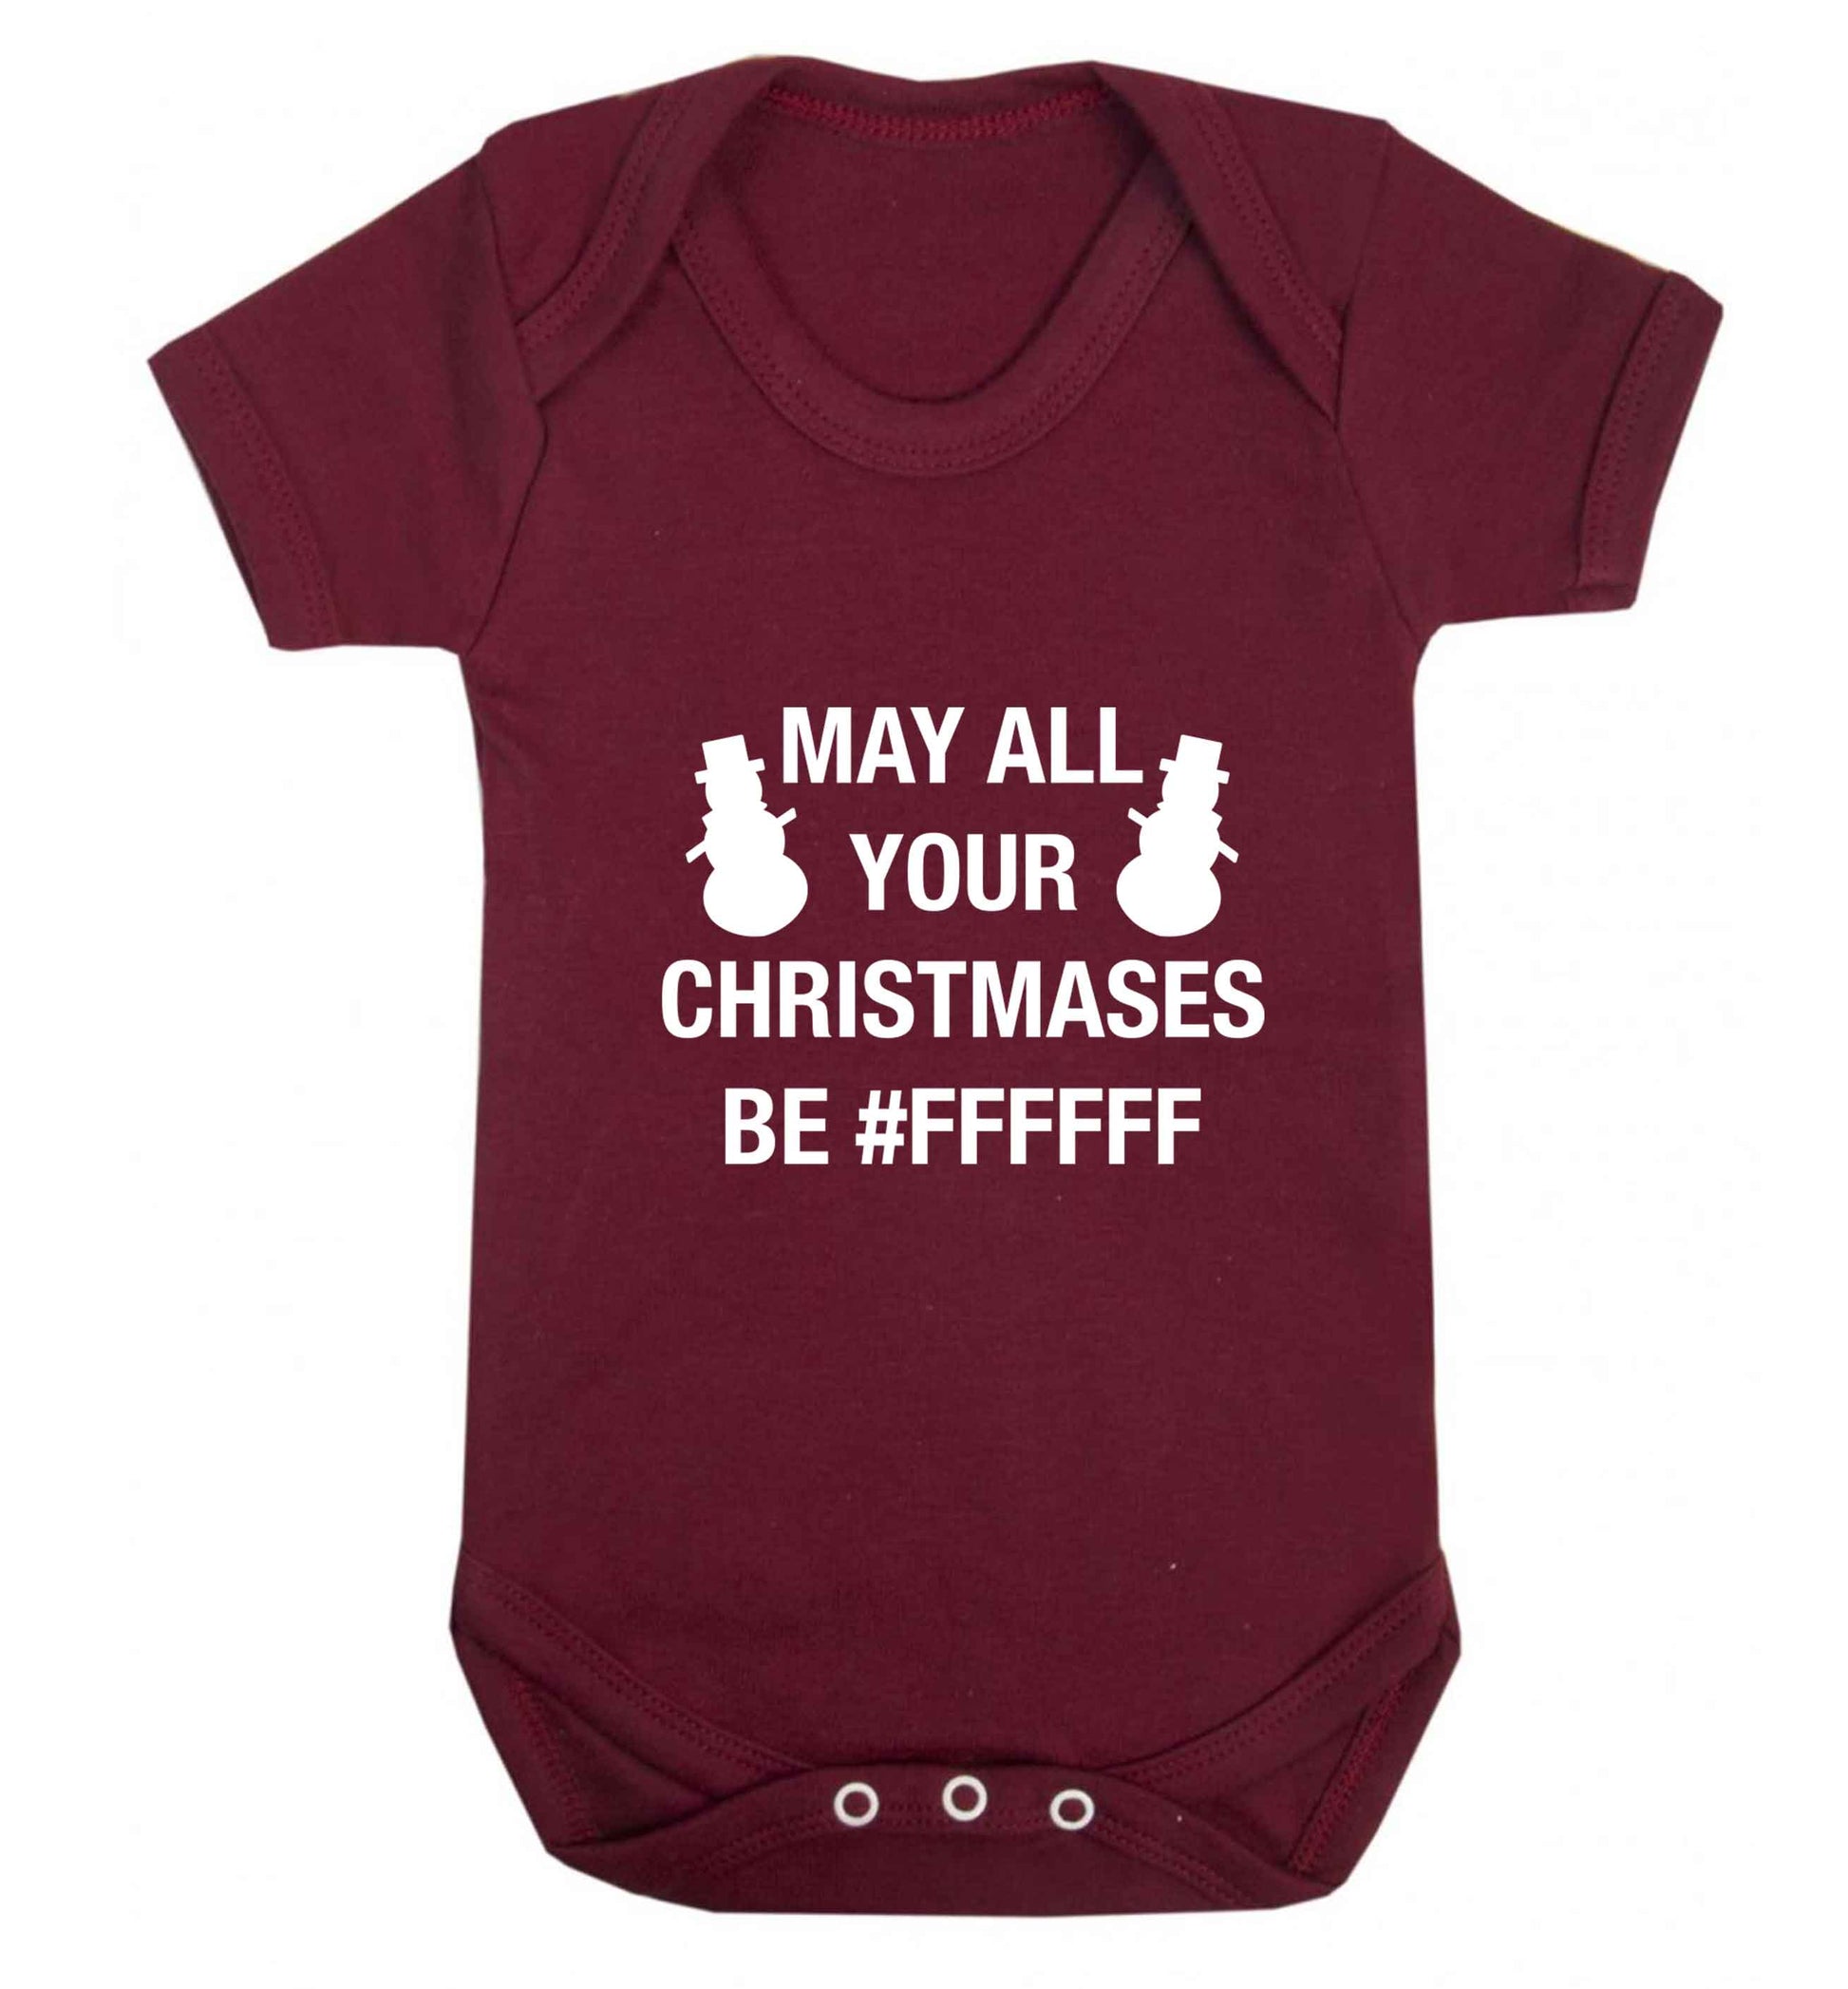 May all your Christmases be #FFFFFF baby vest maroon 18-24 months